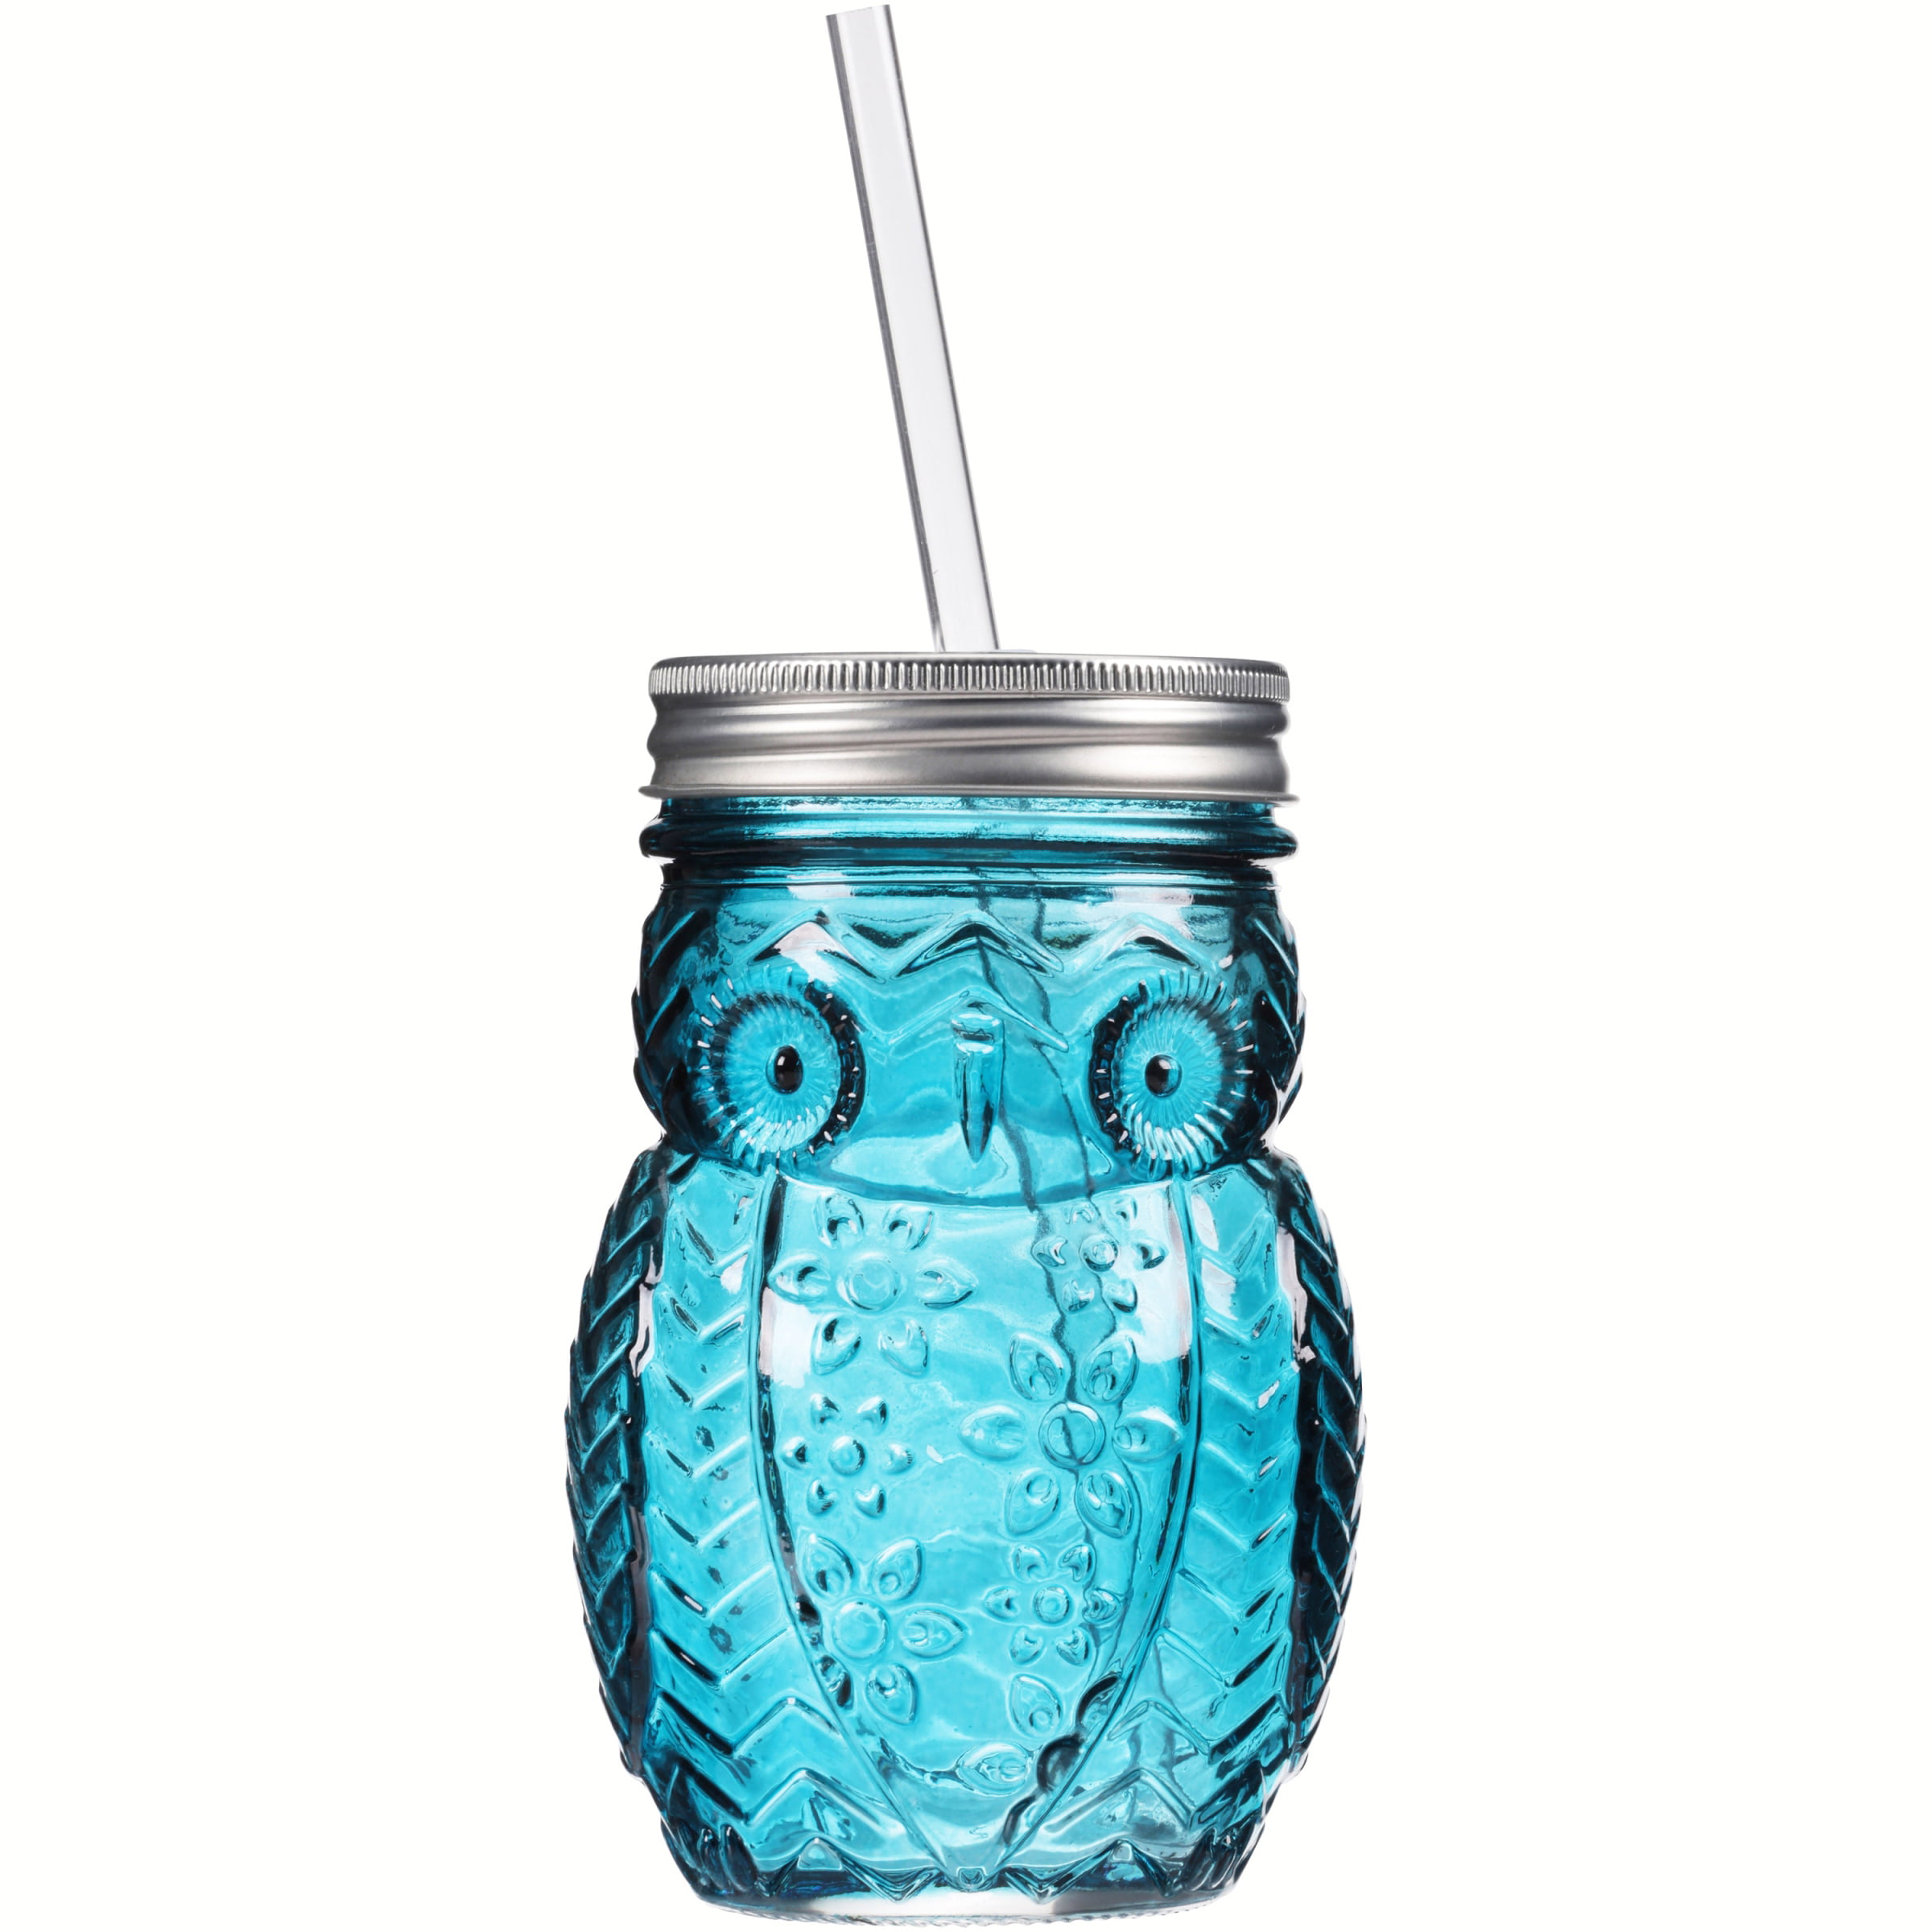 Mainstays Glass Owl Sipper with Straw, Set of 4 